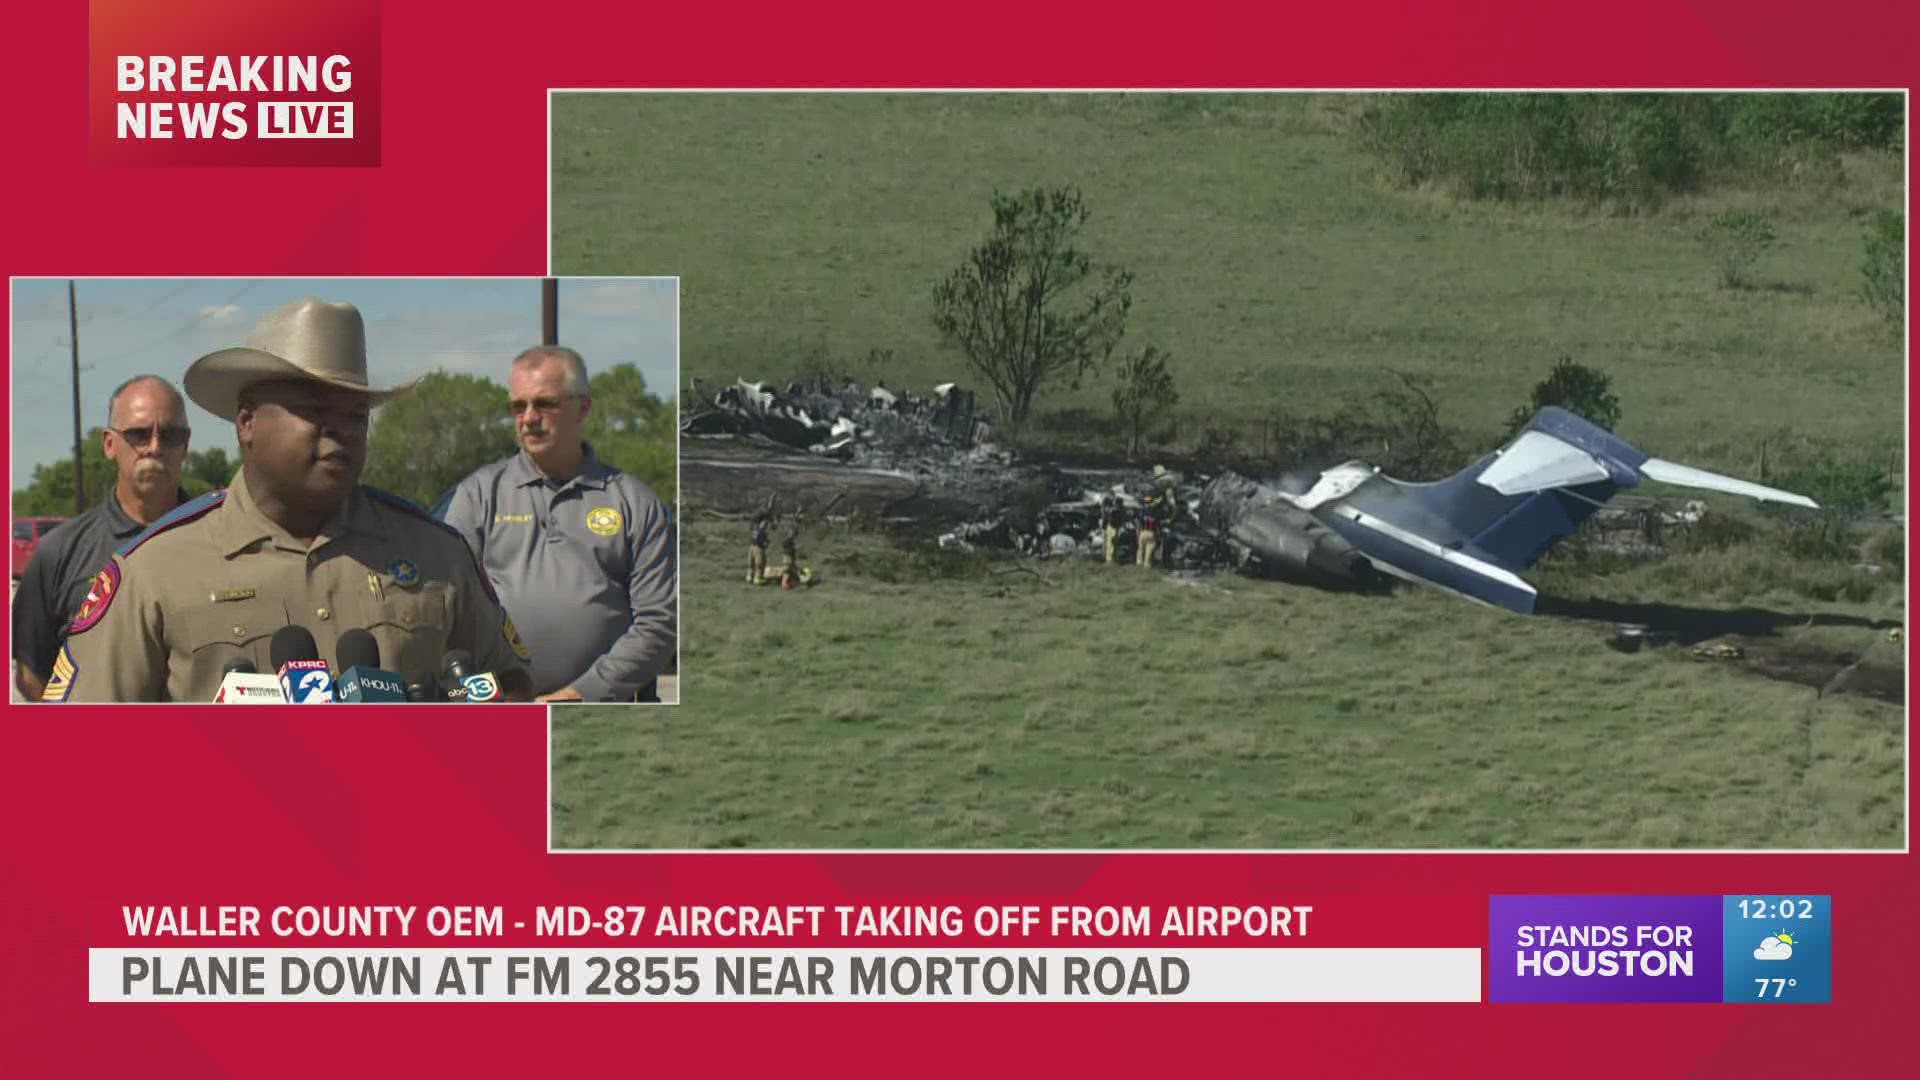 DPS and Waller County officials give an update after a plane is engulfed in flames.